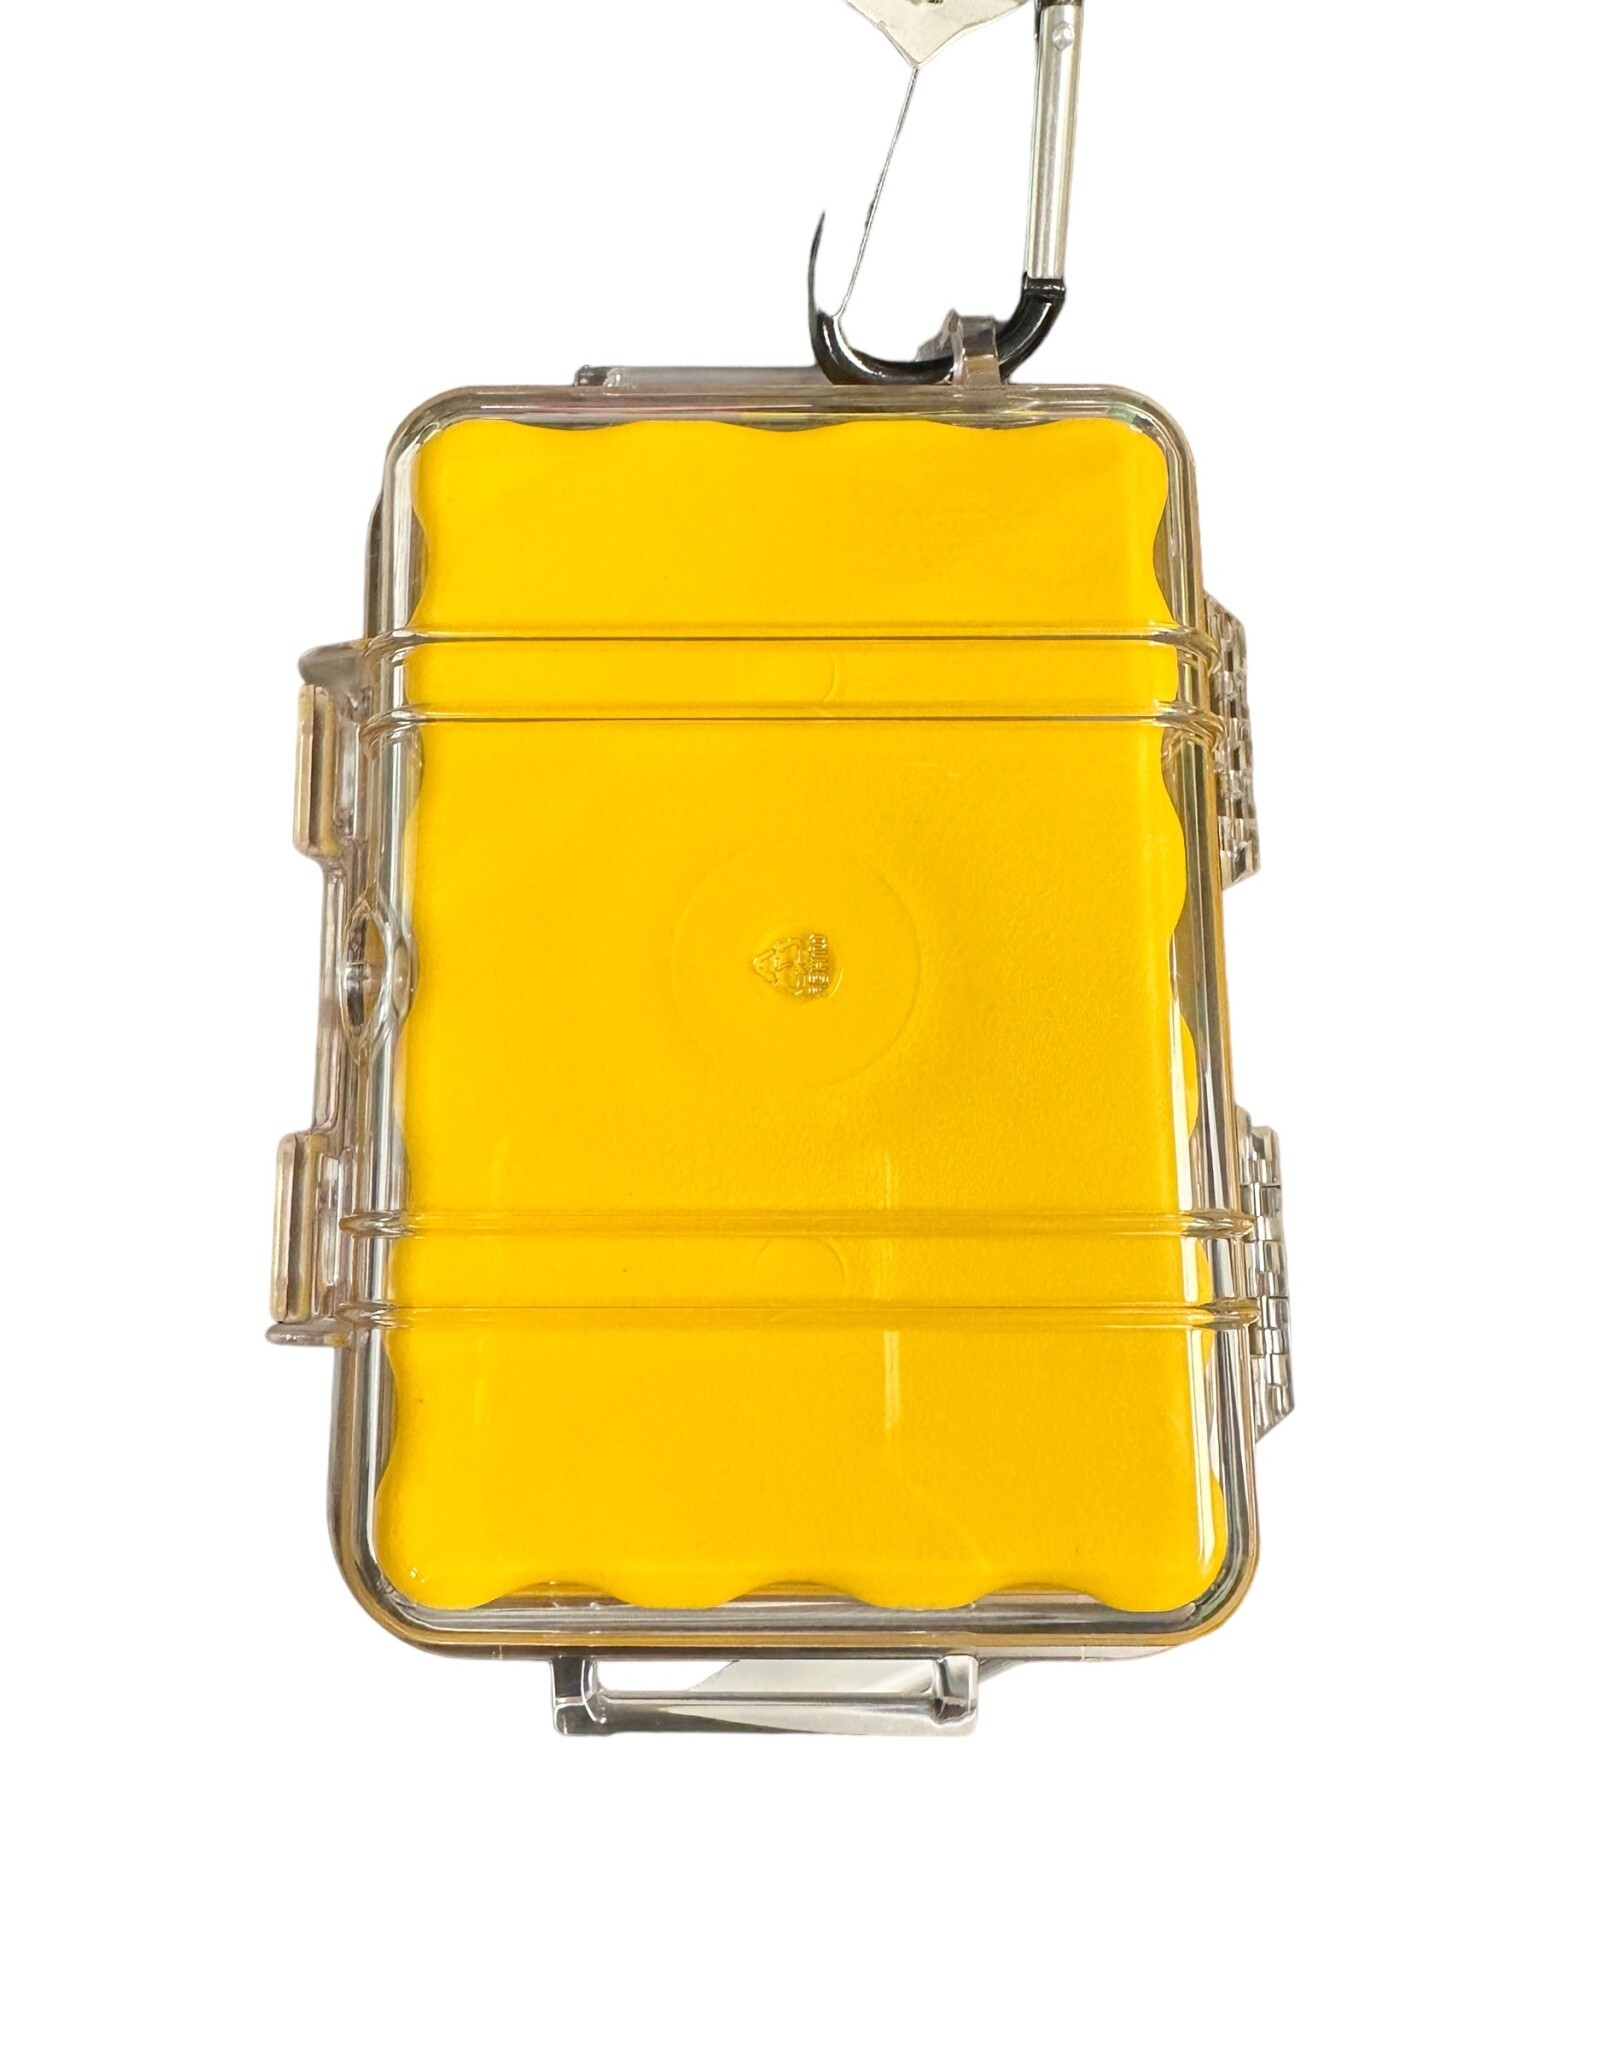 Pelican Products 1020 PELICAN DRY BOX